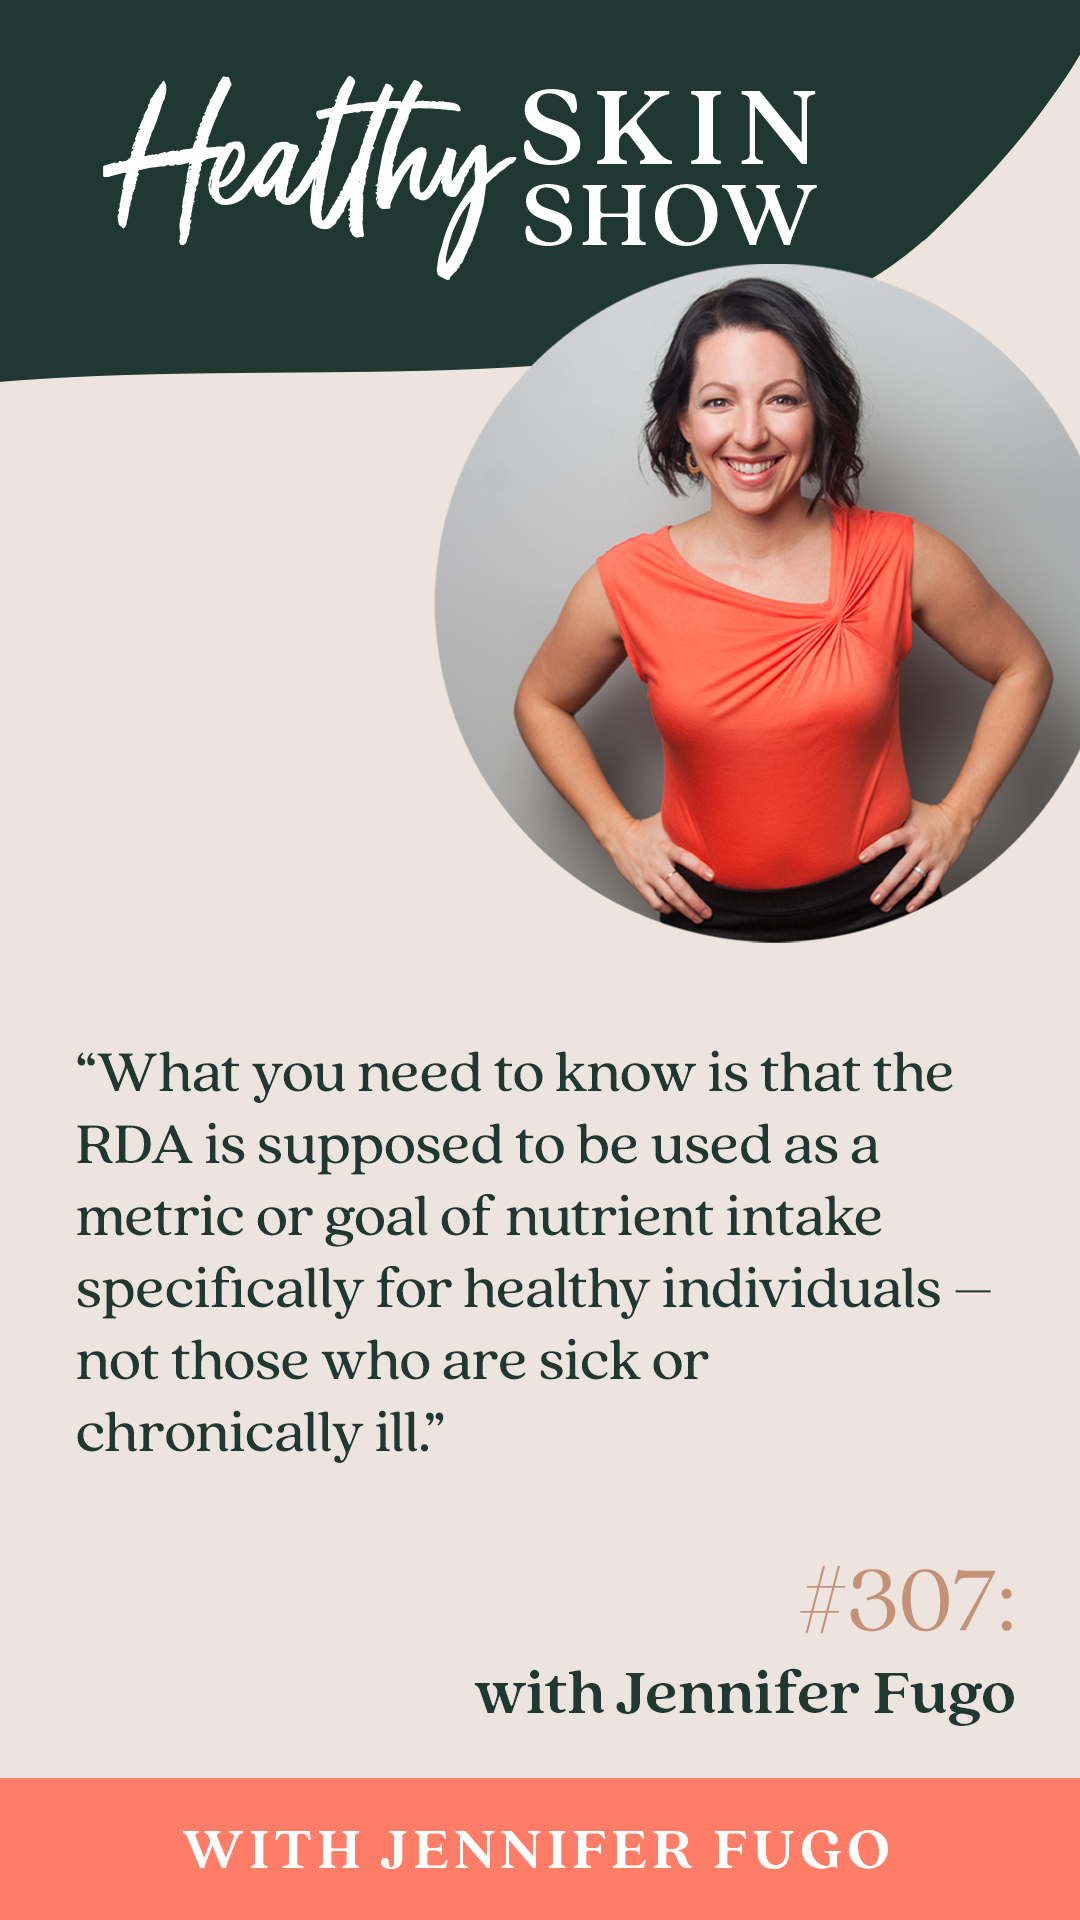 What you need to know is that the RDA is supposed to be used as a metric or goal of nutrient intake specifically for healthy individuals – not those who are sick or chronically ill.